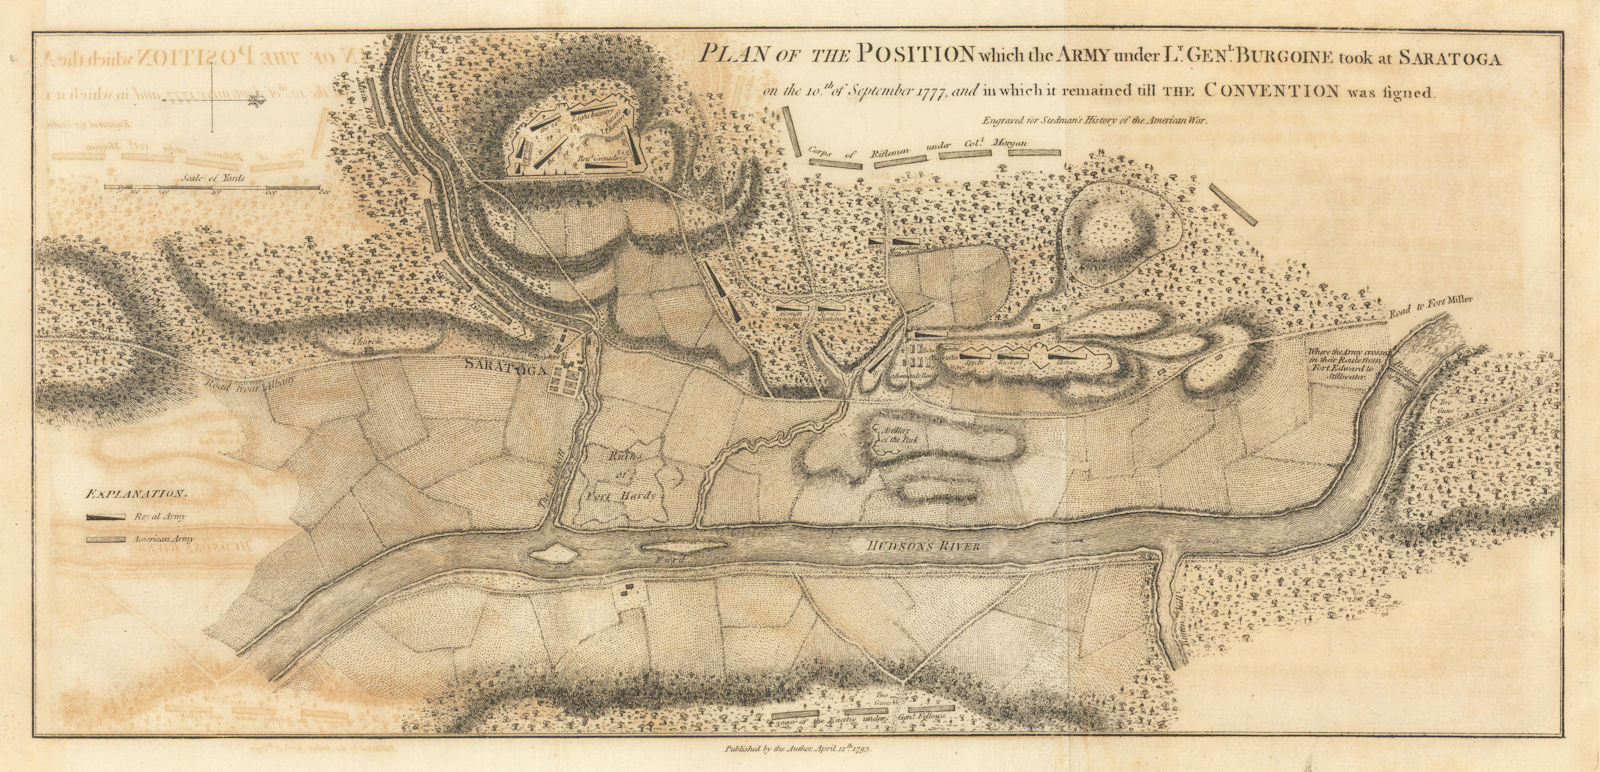 Associate Product Plan of the Position which the Army… took at Saratoga. FADEN/STEDMAN 1794 map